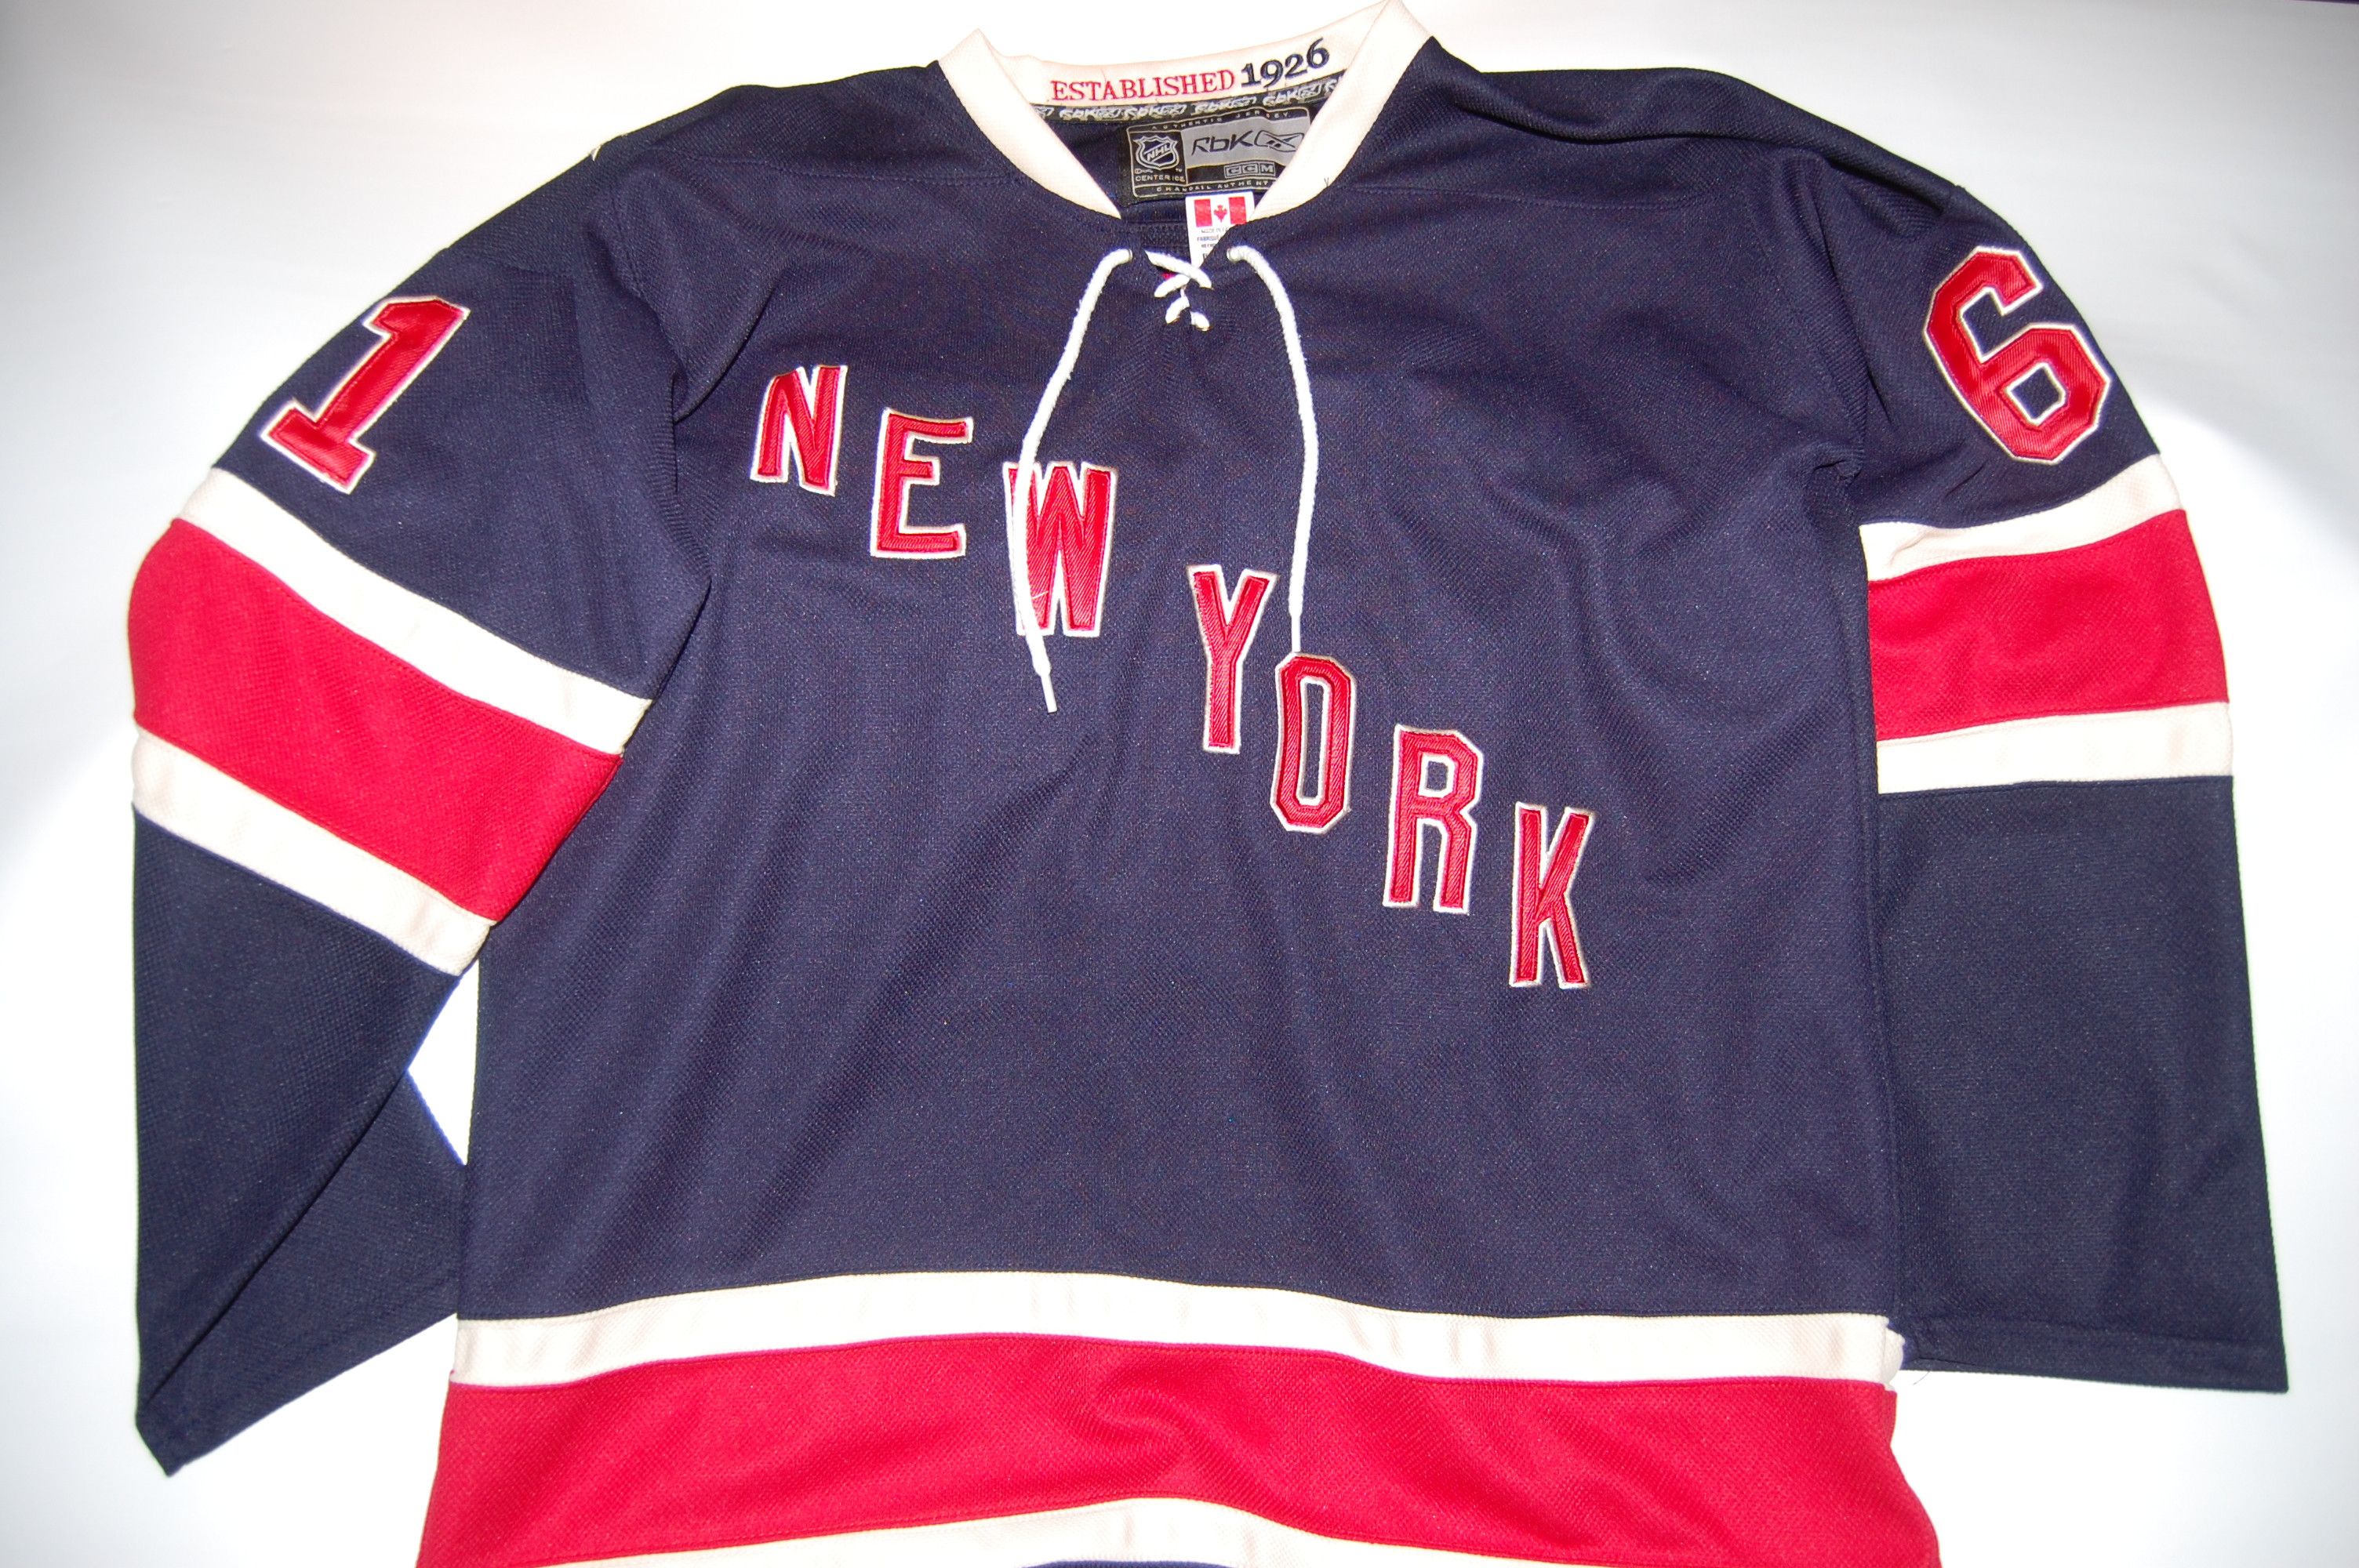 Rangers models attend the New York Rangers 85th anniversary jersey